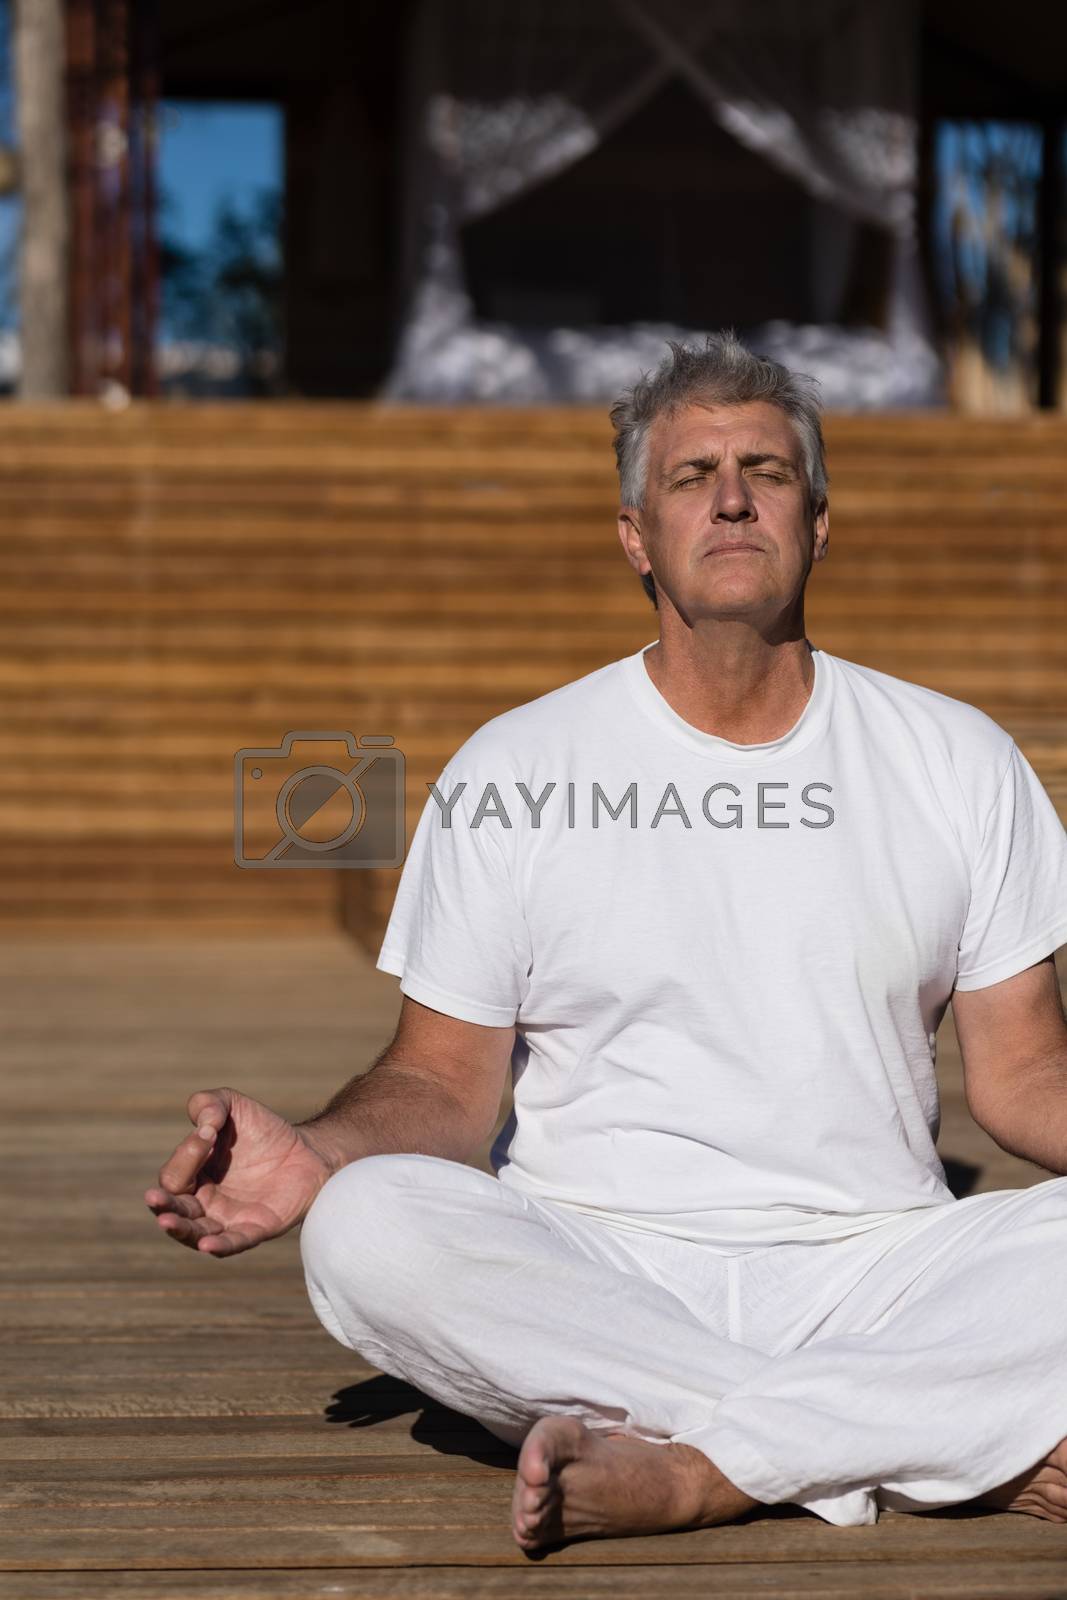 Royalty free image of Man practicing yoga on wooden plank by Wavebreakmedia